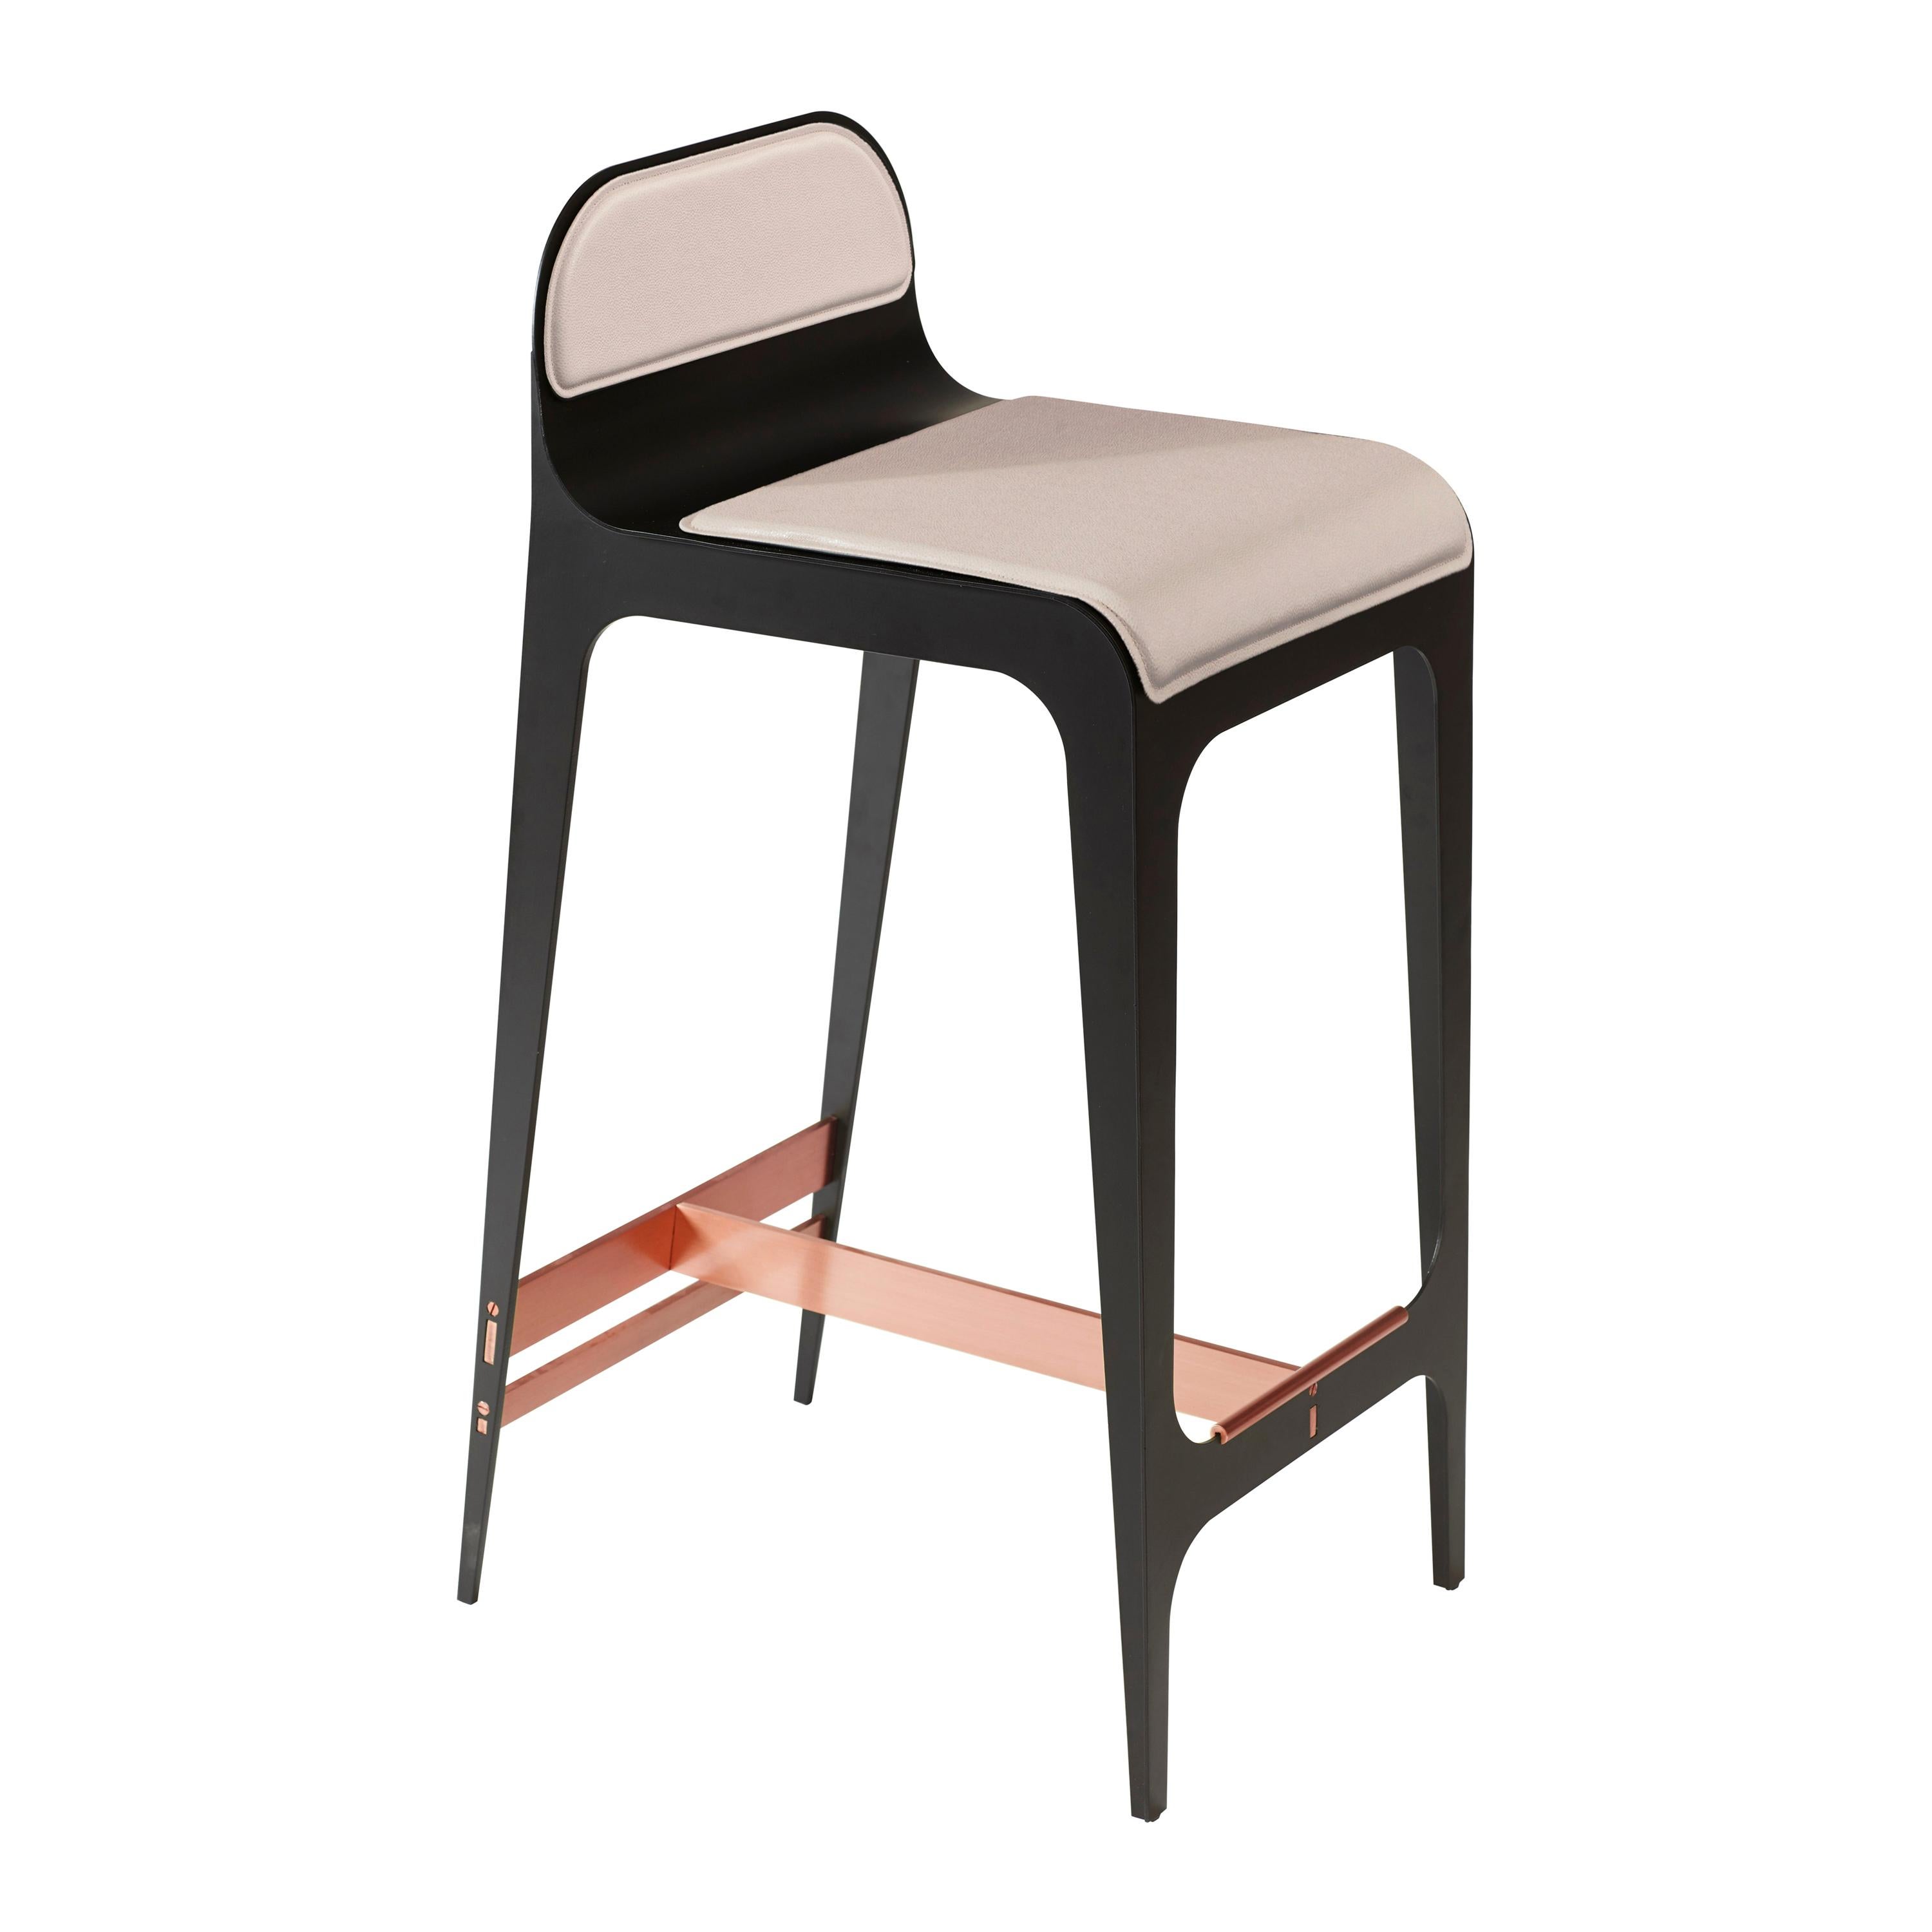 Pink (Nude Pink) Bardot Counterstool with Vegan Leather Seat and Satin Copper Hardware